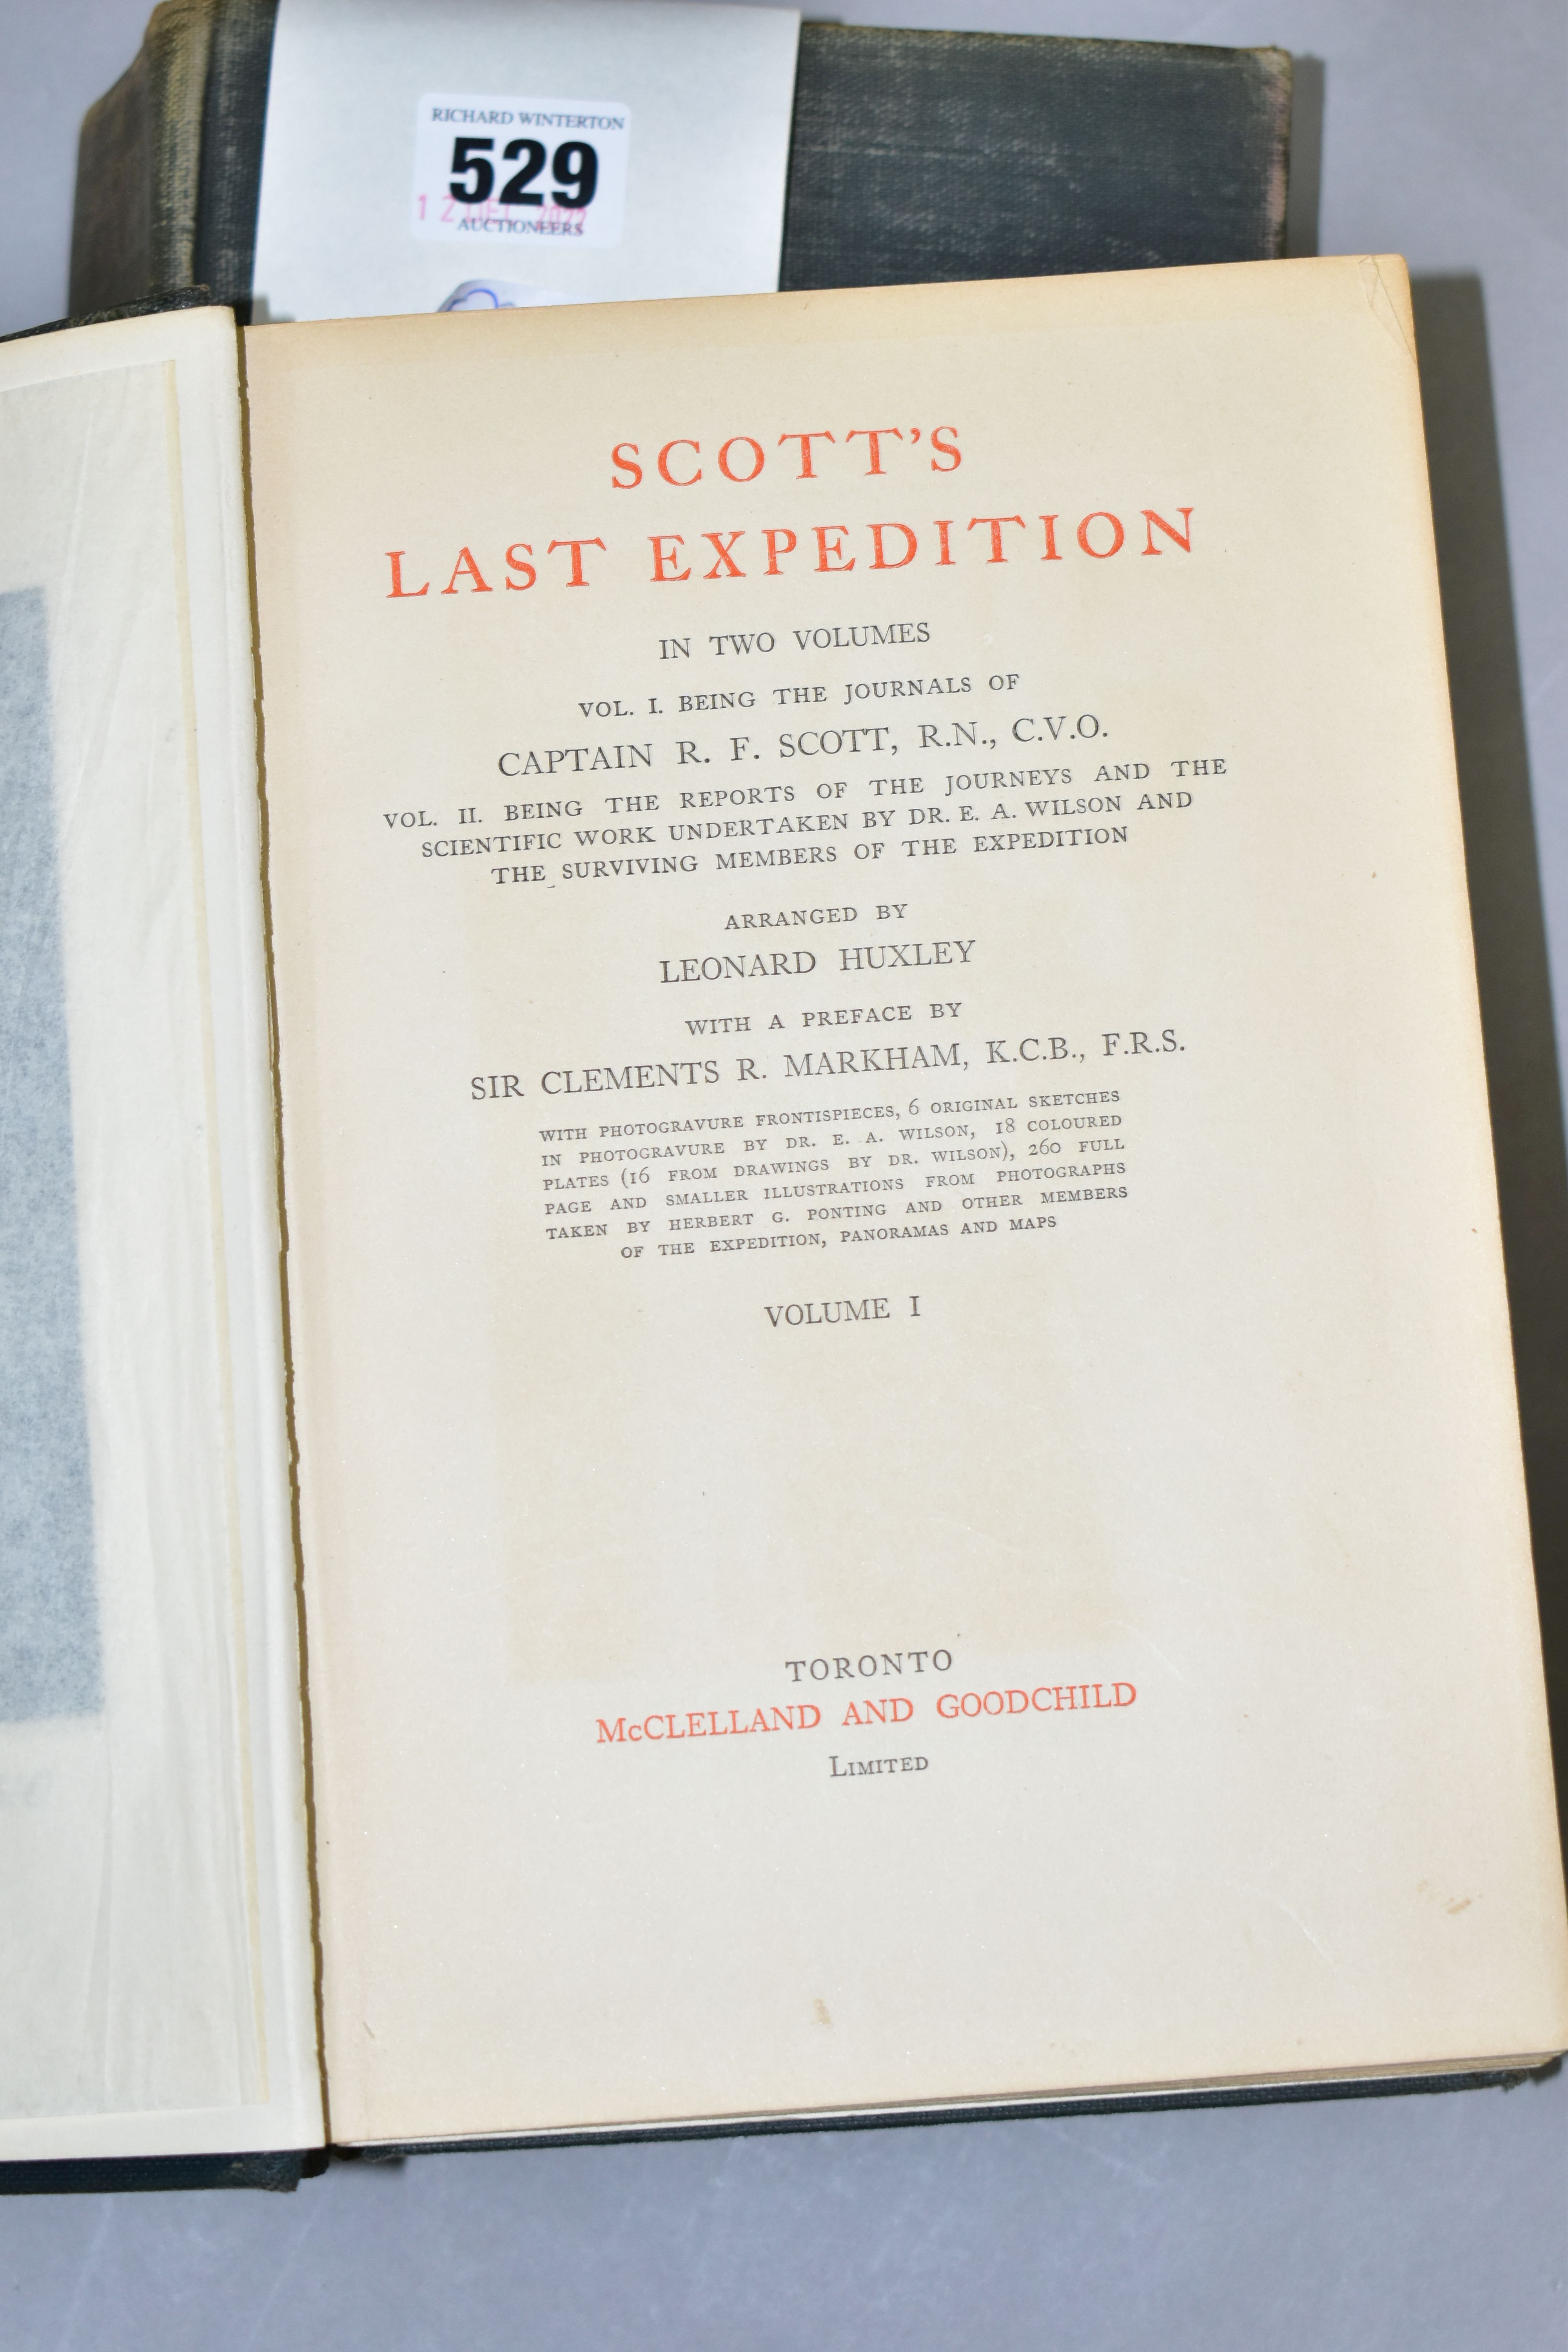 SCOTT'S LAST EXPEDITION, Vols.1 & 2, American 1st Edition published by McClellend and Goodchild, - Image 3 of 12